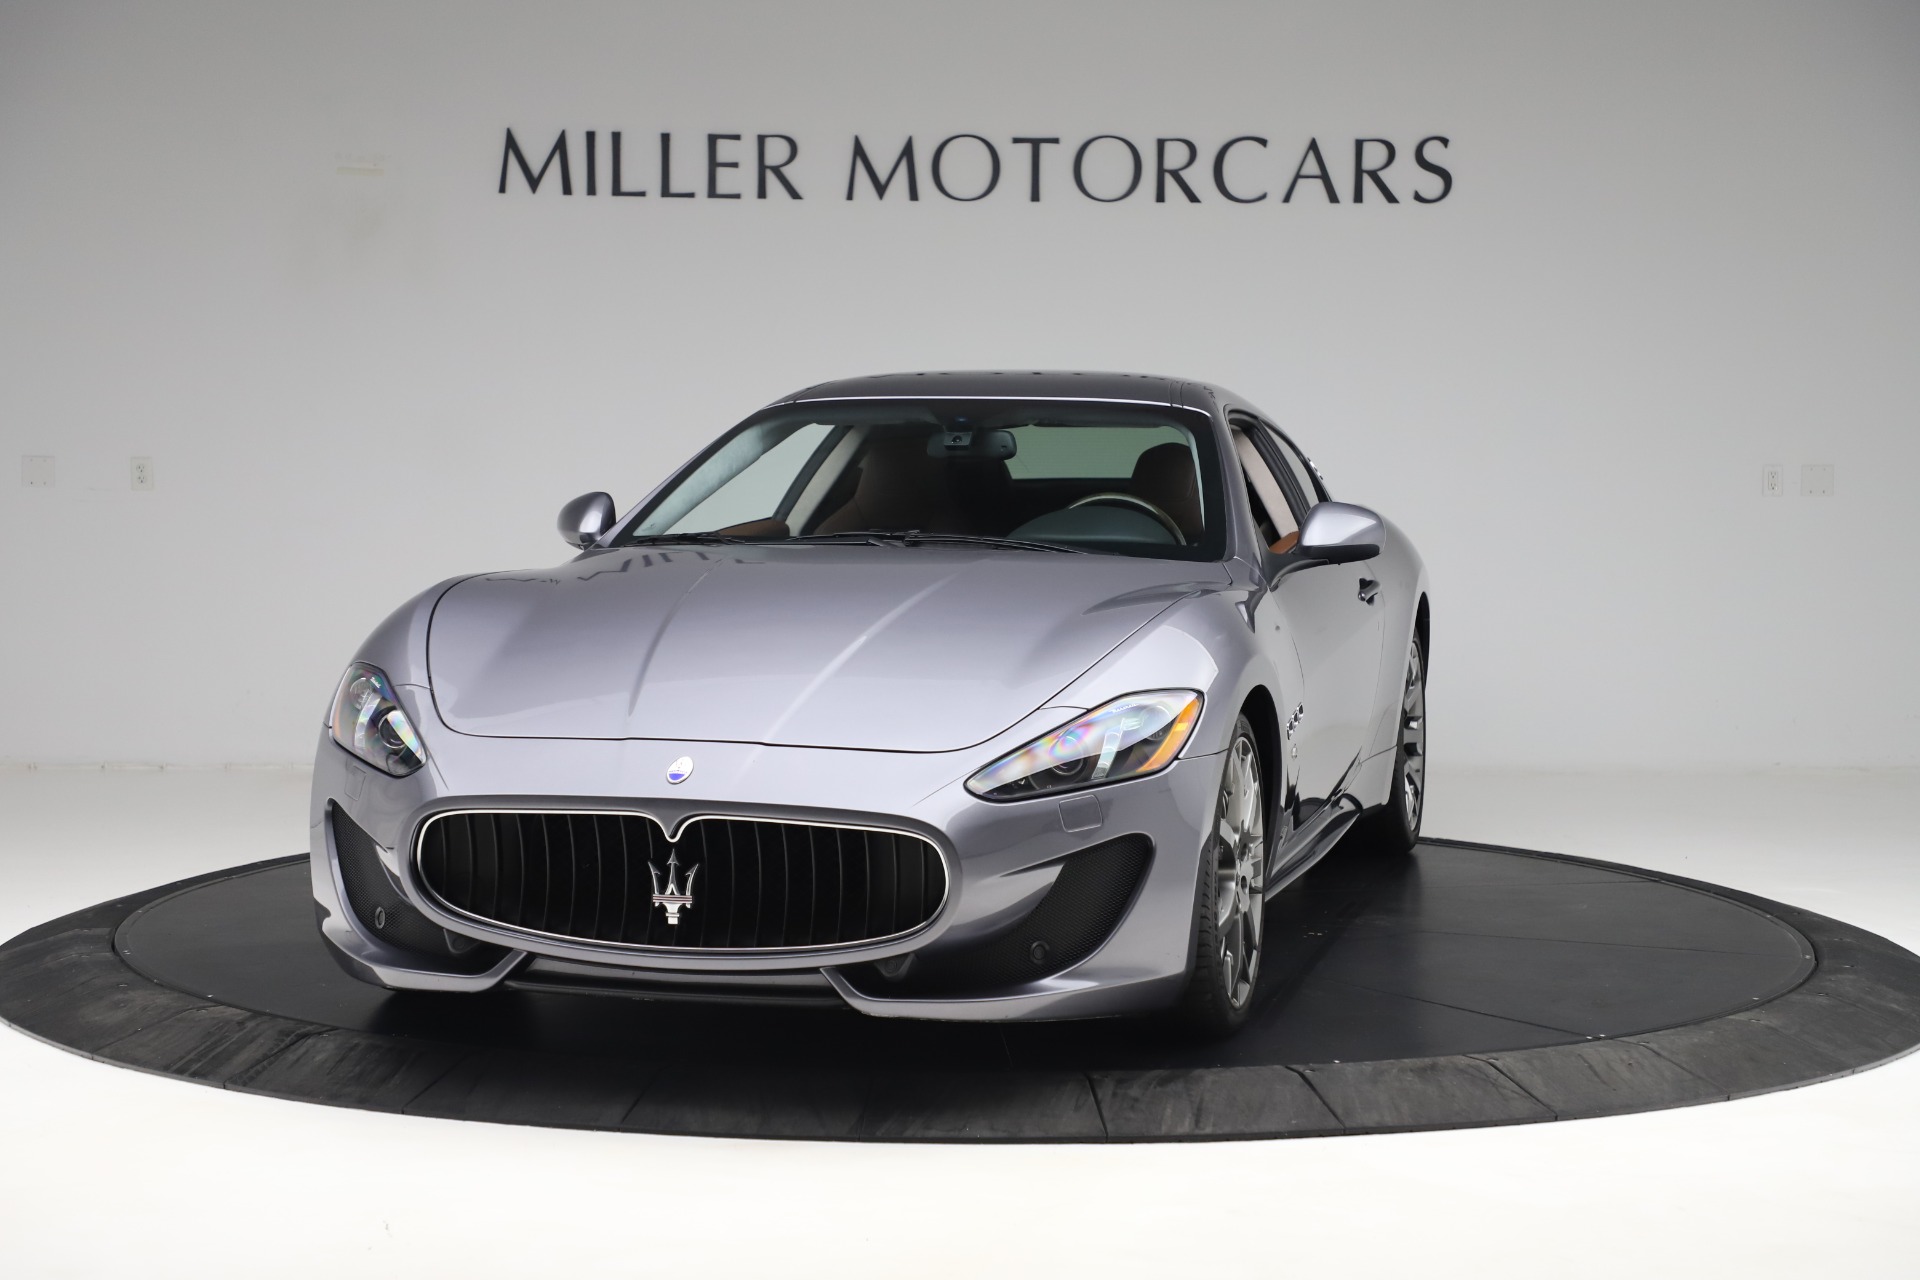 Used 2016 Maserati GranTurismo Sport for sale Sold at Rolls-Royce Motor Cars Greenwich in Greenwich CT 06830 1